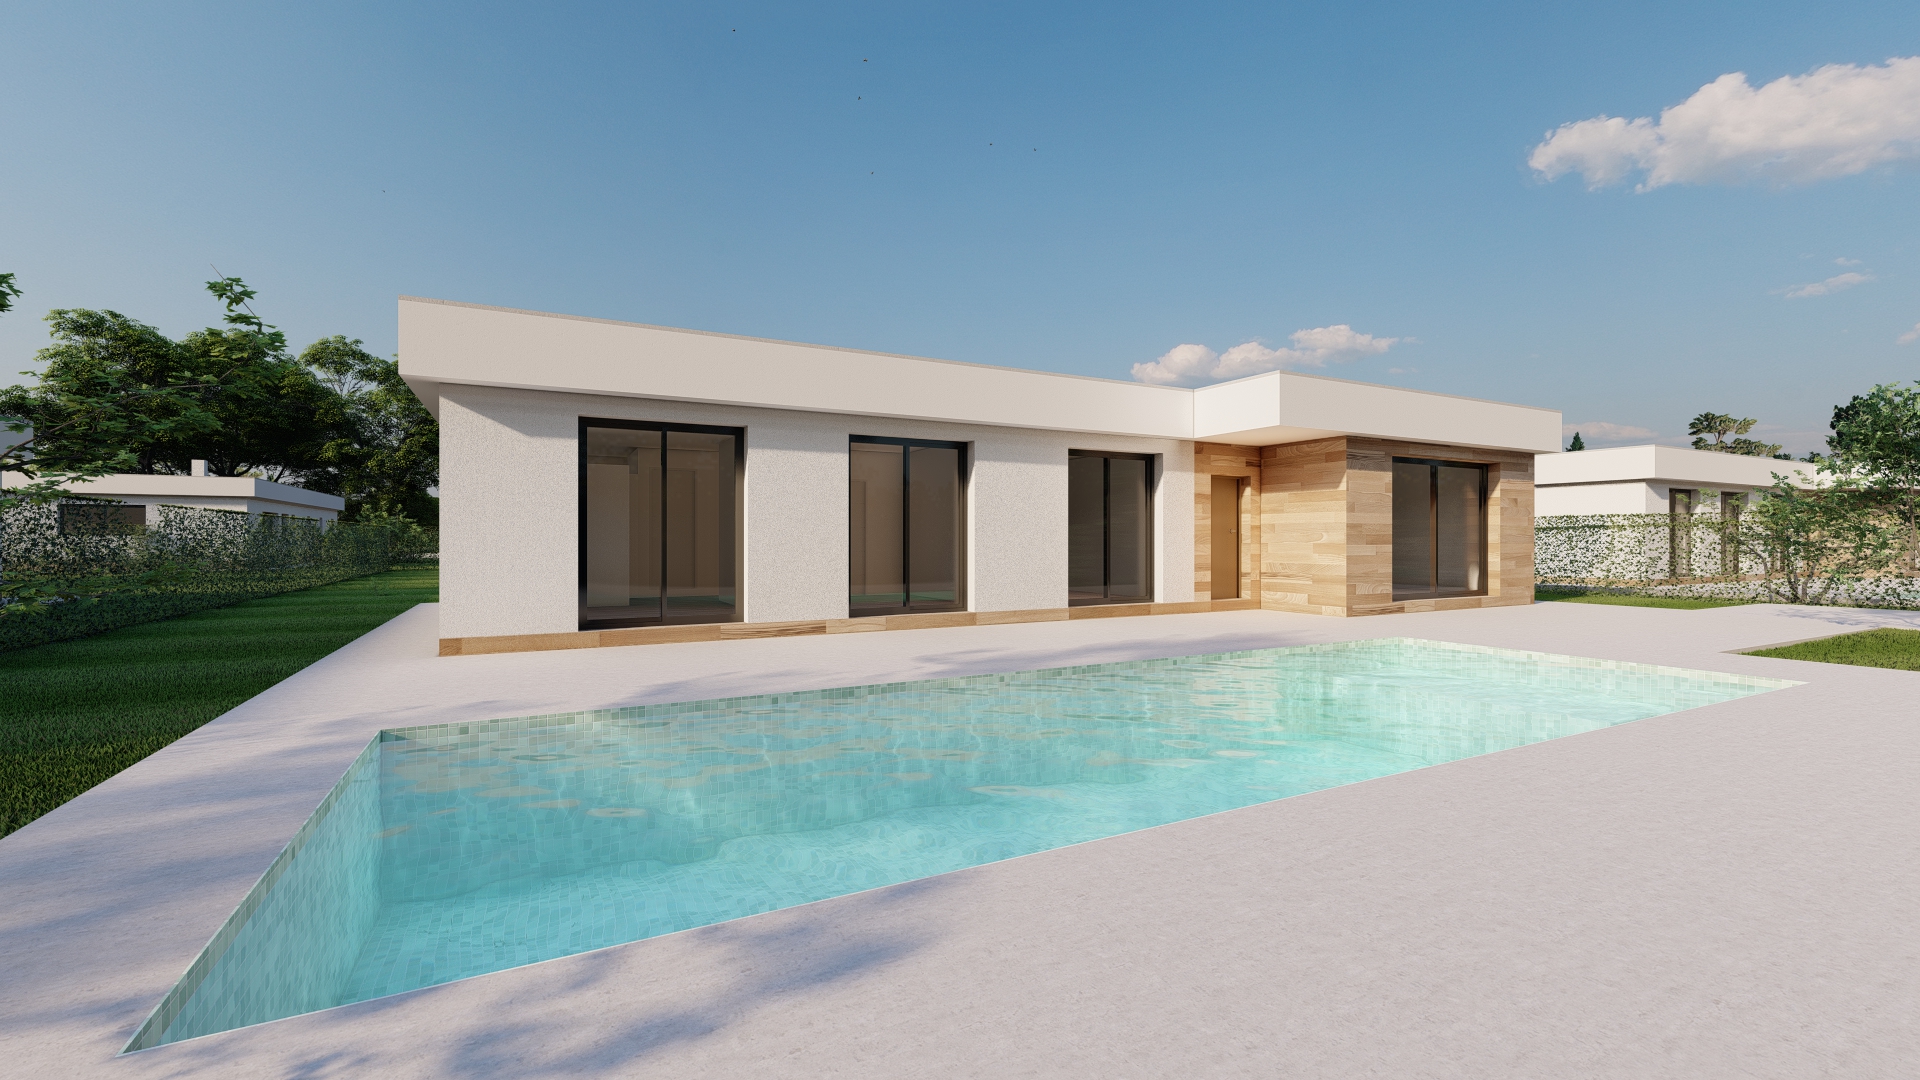 Detached villas on plots of more than 1000 m2 in Calasparra